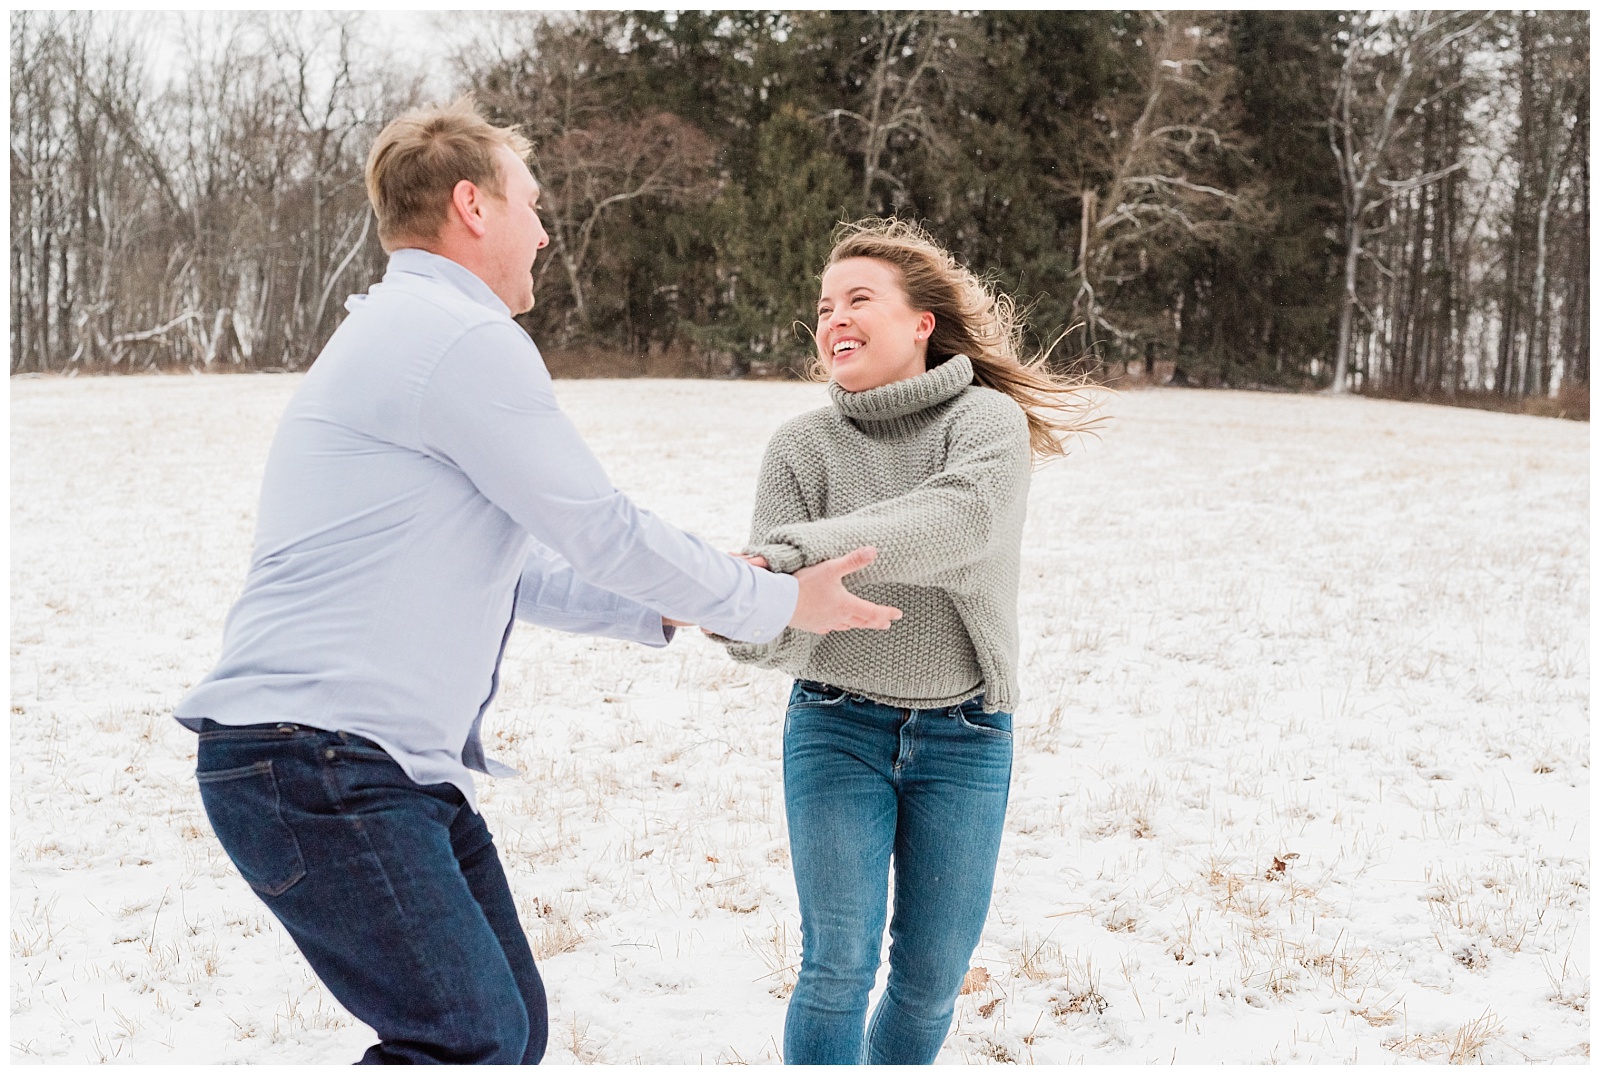 New Jersey Engagement Session, Snowy, Winter, Cozy, Session, Wedding Photographer, Cross Estate Gardens, Snow, Wintry, Light and Airy, Wild, Joyful